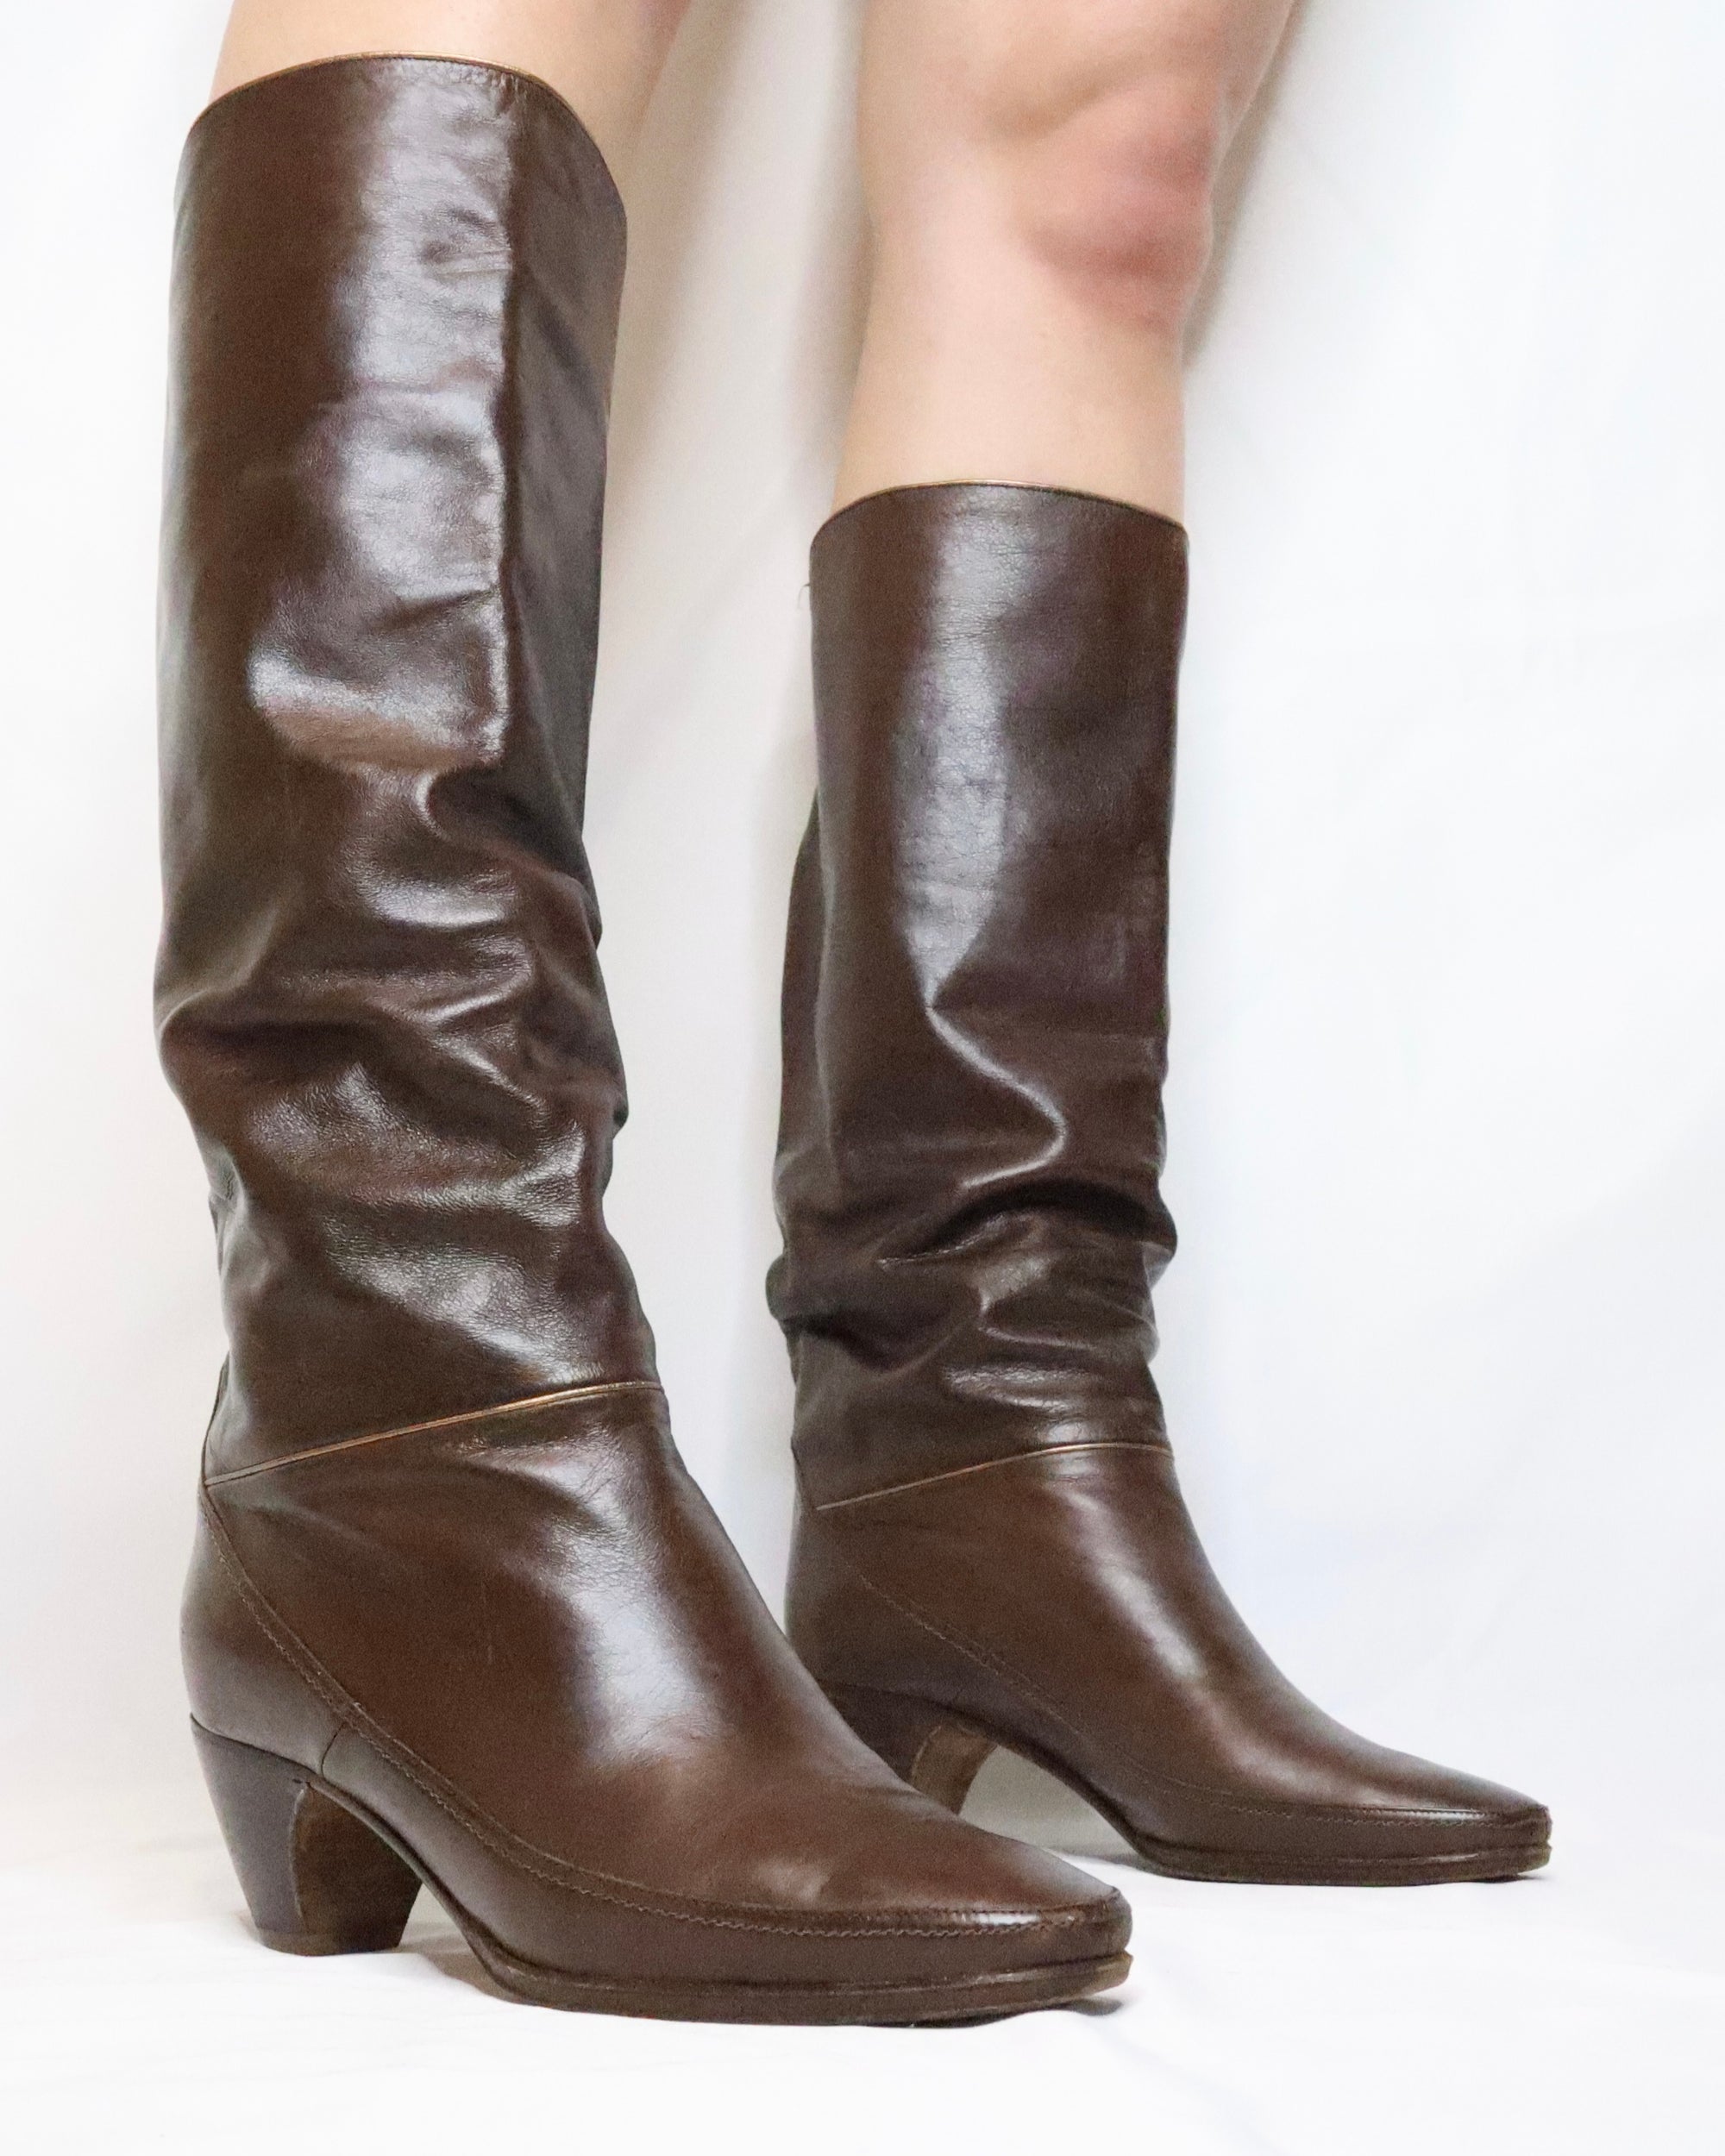 Slouchy Leather Riding Boots (6 US/36.5 EU)